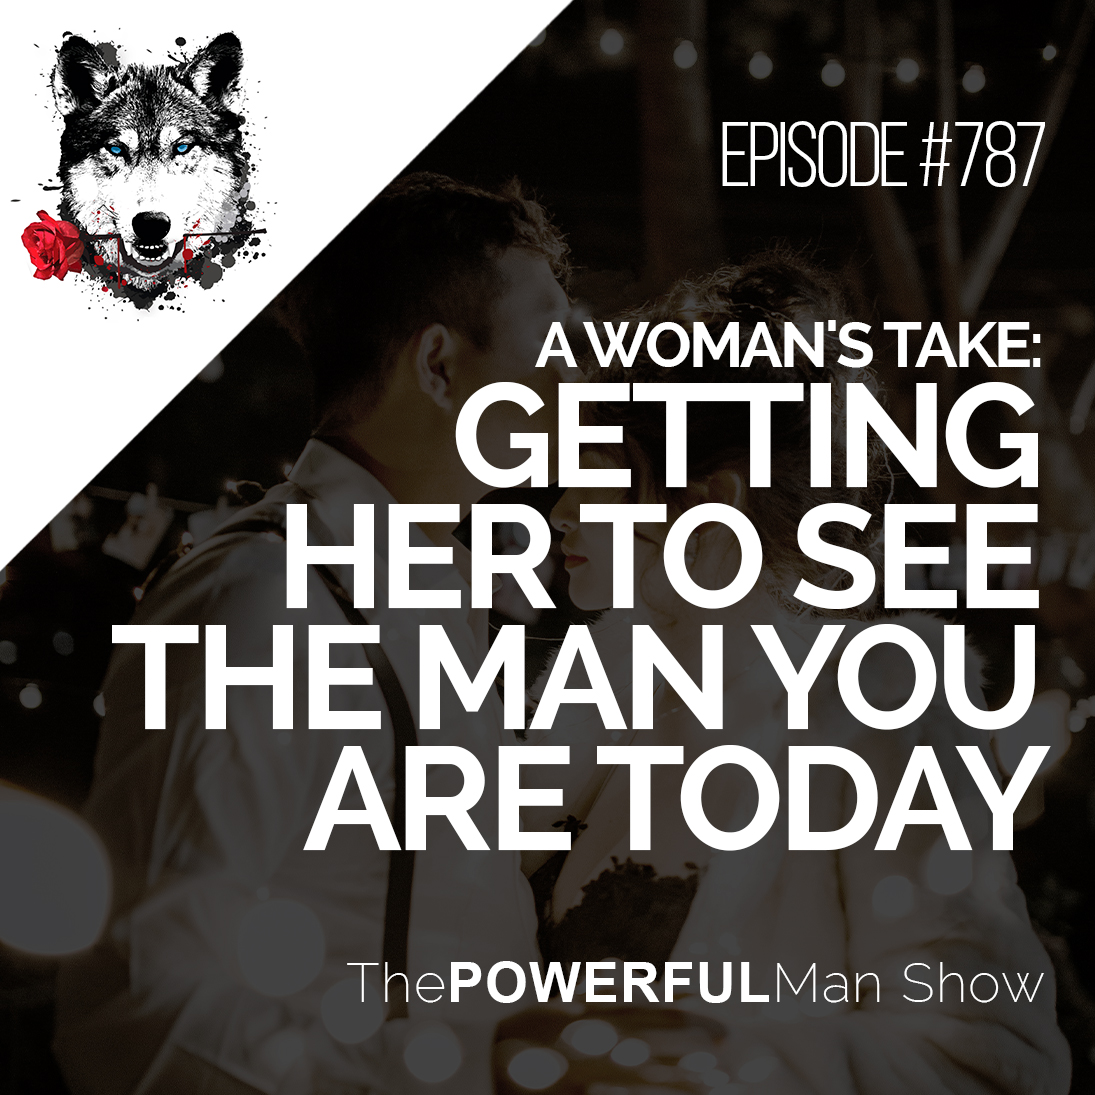 A Woman's Take: Getting Her To See The Man You Are Today